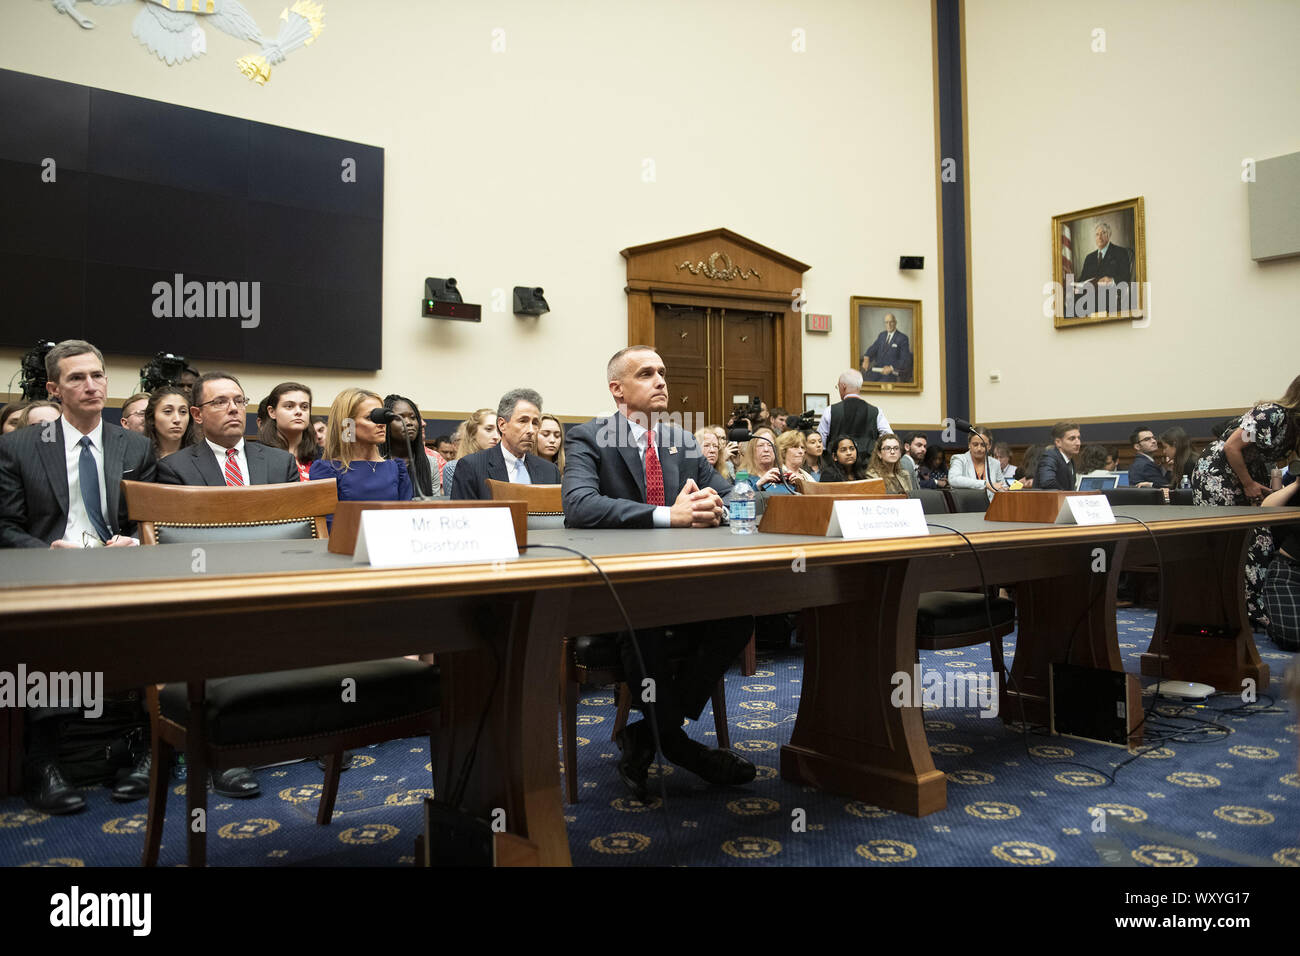 September 17, 2019, Washington, District of Columbia, USA: Former Trump campaign manager Corey Lewandowski, center, waits to give testimony before the United States House Committee on the Judiciary conducts a hearing titled ''Presidential Obstruction of Justice and Abuse of Power'' on Capitol Hill in Washington, DC on Tuesday, September 17, 2019. The empty chair at left is reserved for Rick Dearborn, who refused to appear and the empty chair at right is reserved for Robert Porter, who also refused to appear. Credit: Ron Sachs/CNP.(RESTRICTION: NO New York or New Jersey Newspapers or newspa Stock Photo